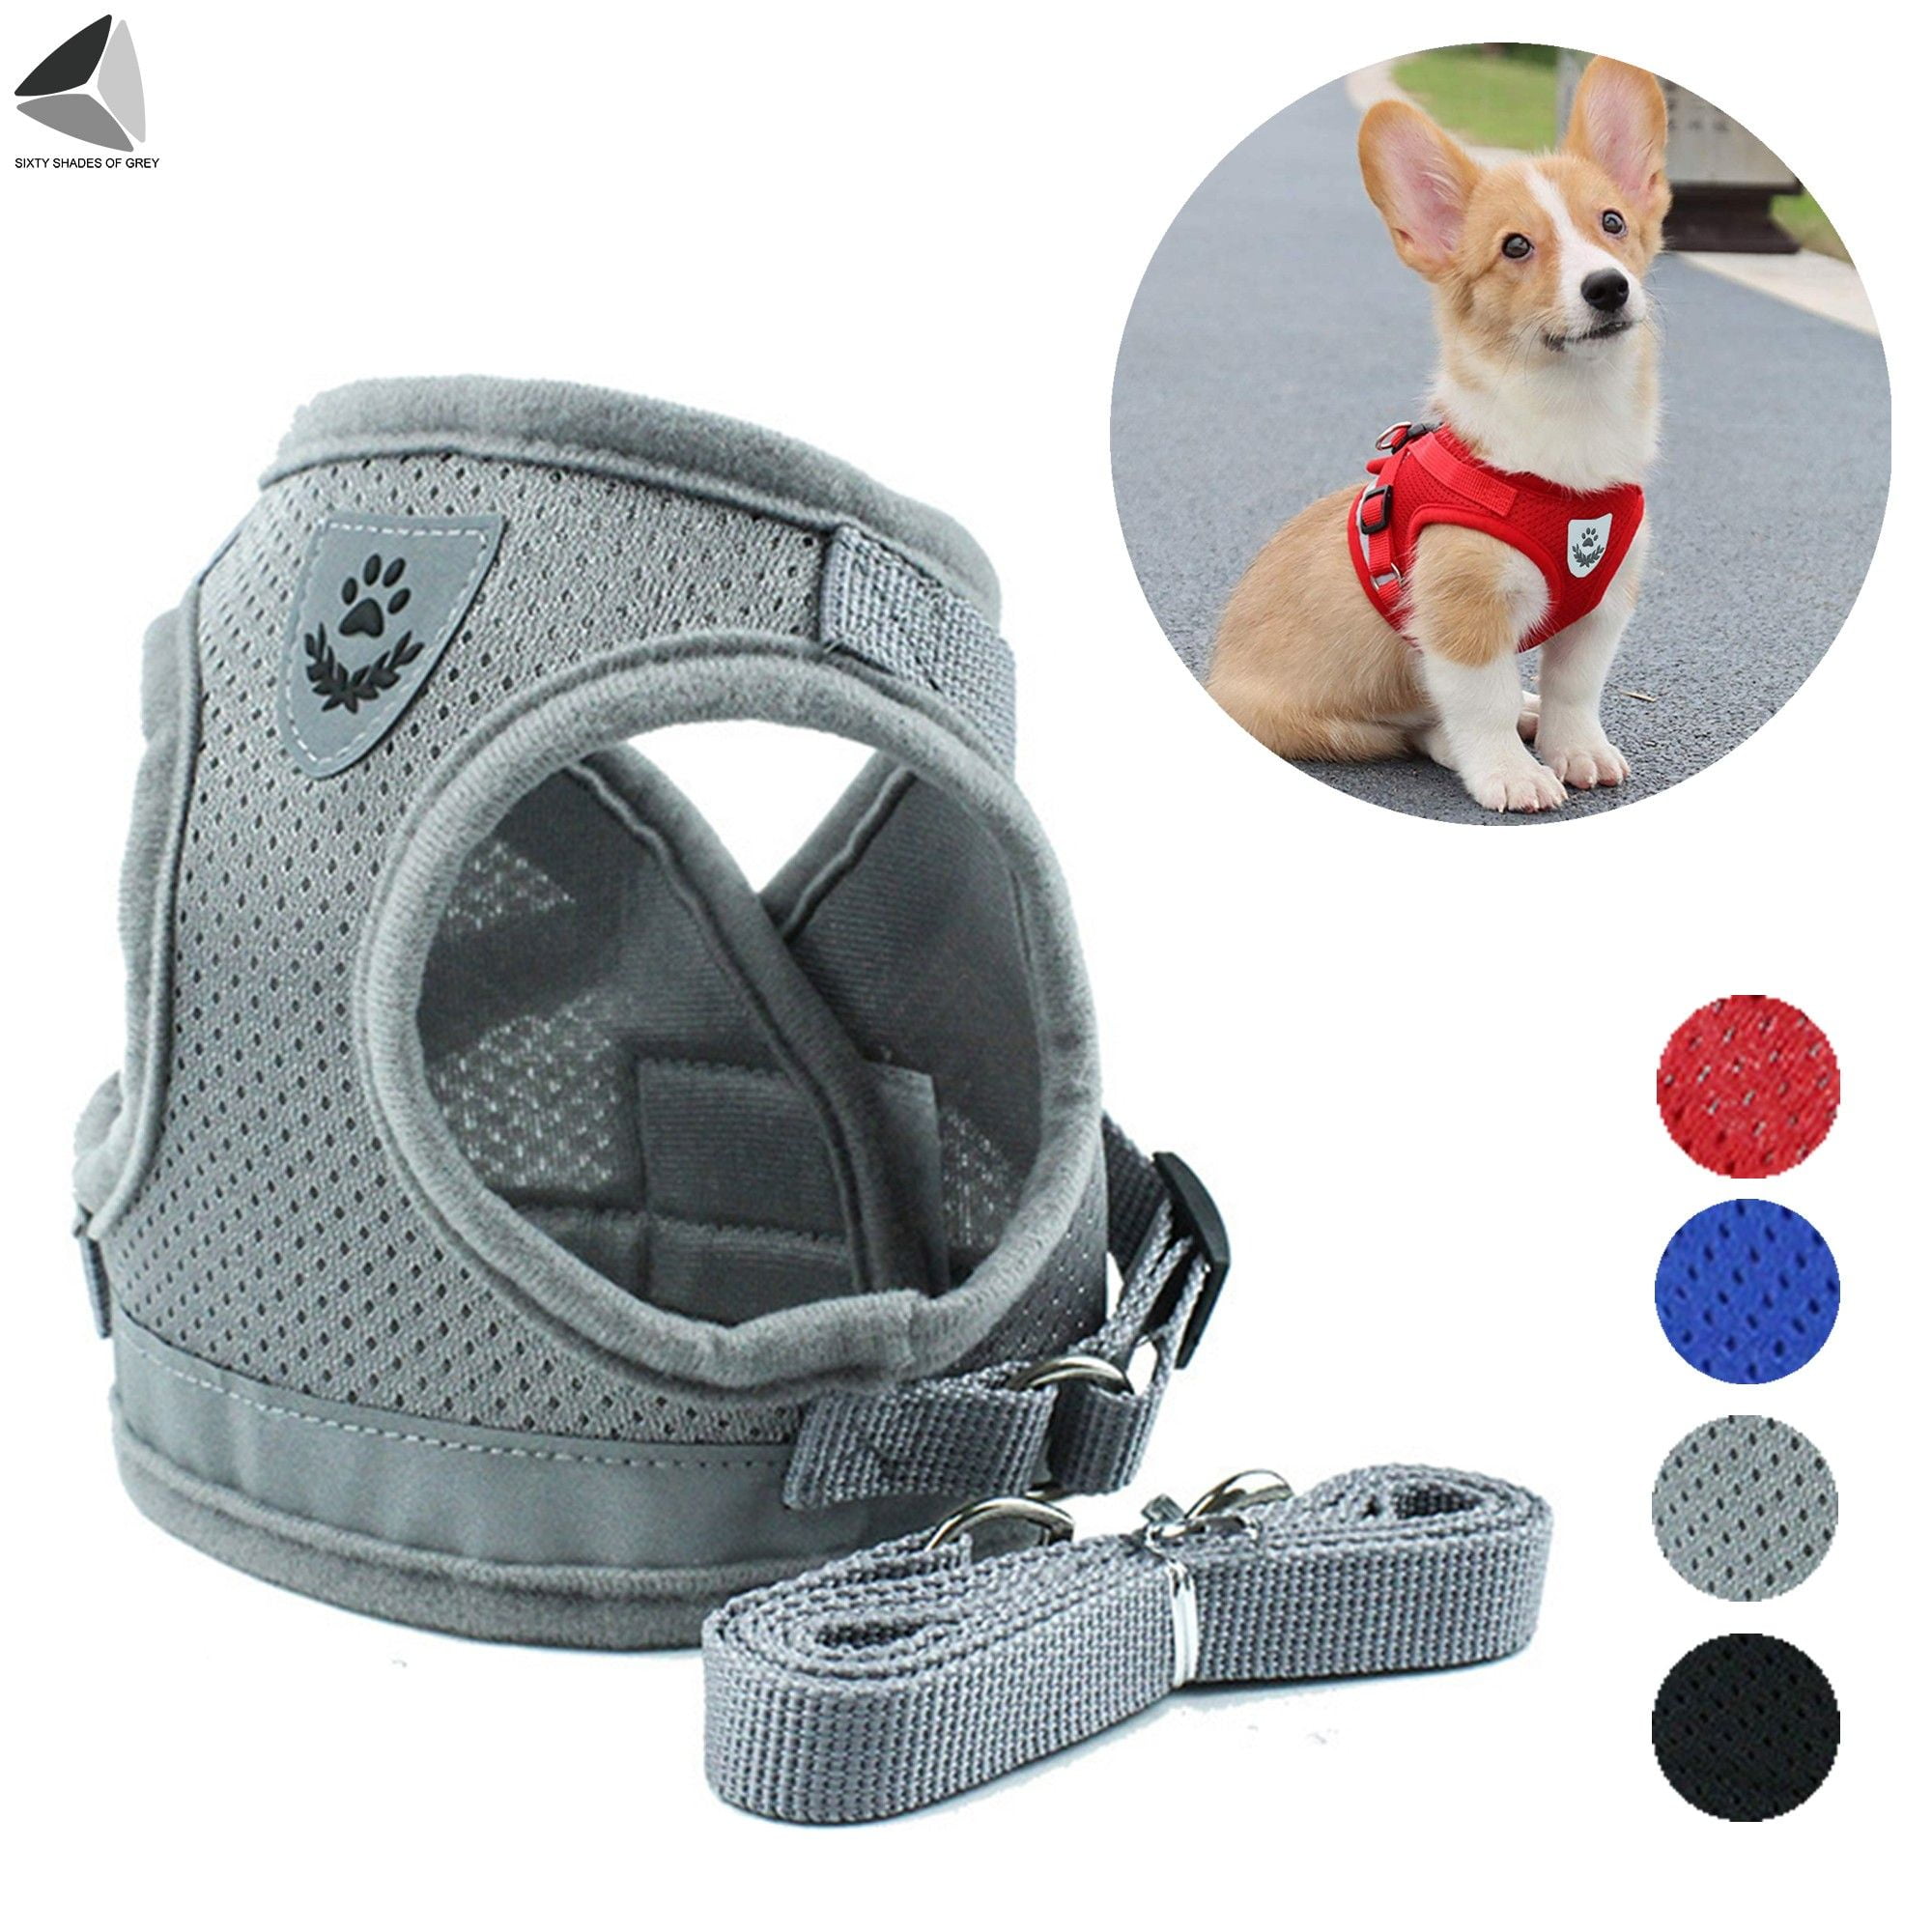 Didog Reflective Cat Harness and Leash Set Chest:8-10 Step in Small Dog Harness No Pull Escape Proof for Walking Soft Breathable Mesh Harness for Small Dogs Puppies,Gray,XS 